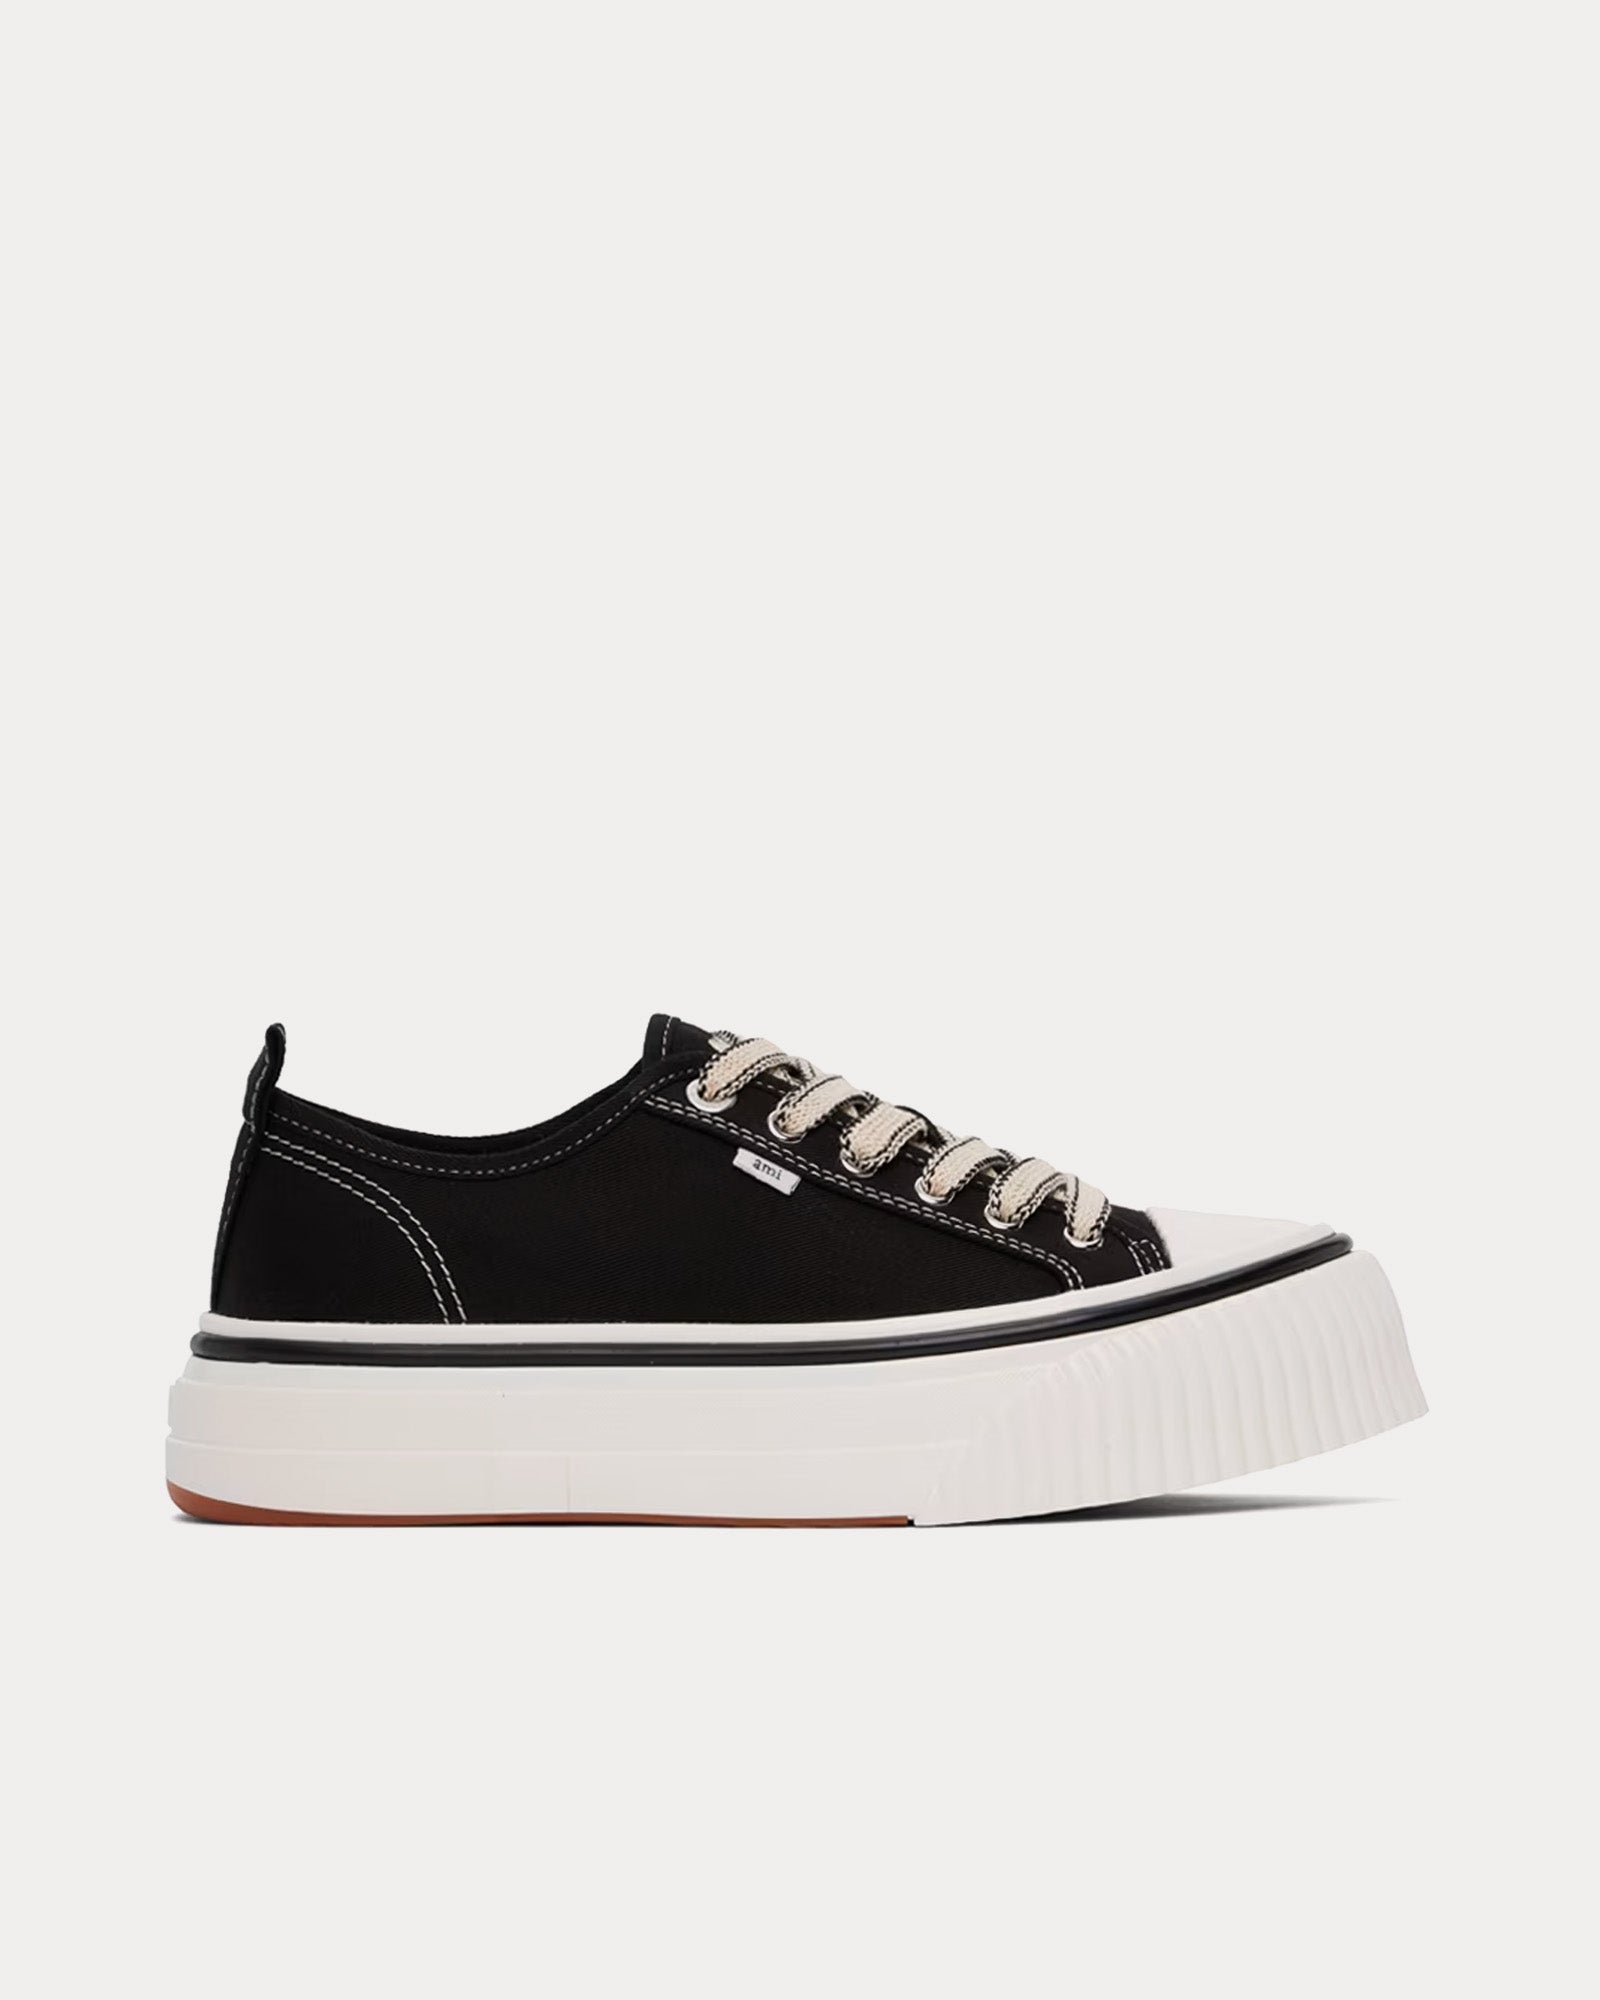 AMI - 1980 Canvas Black / White Low Top Sneakers